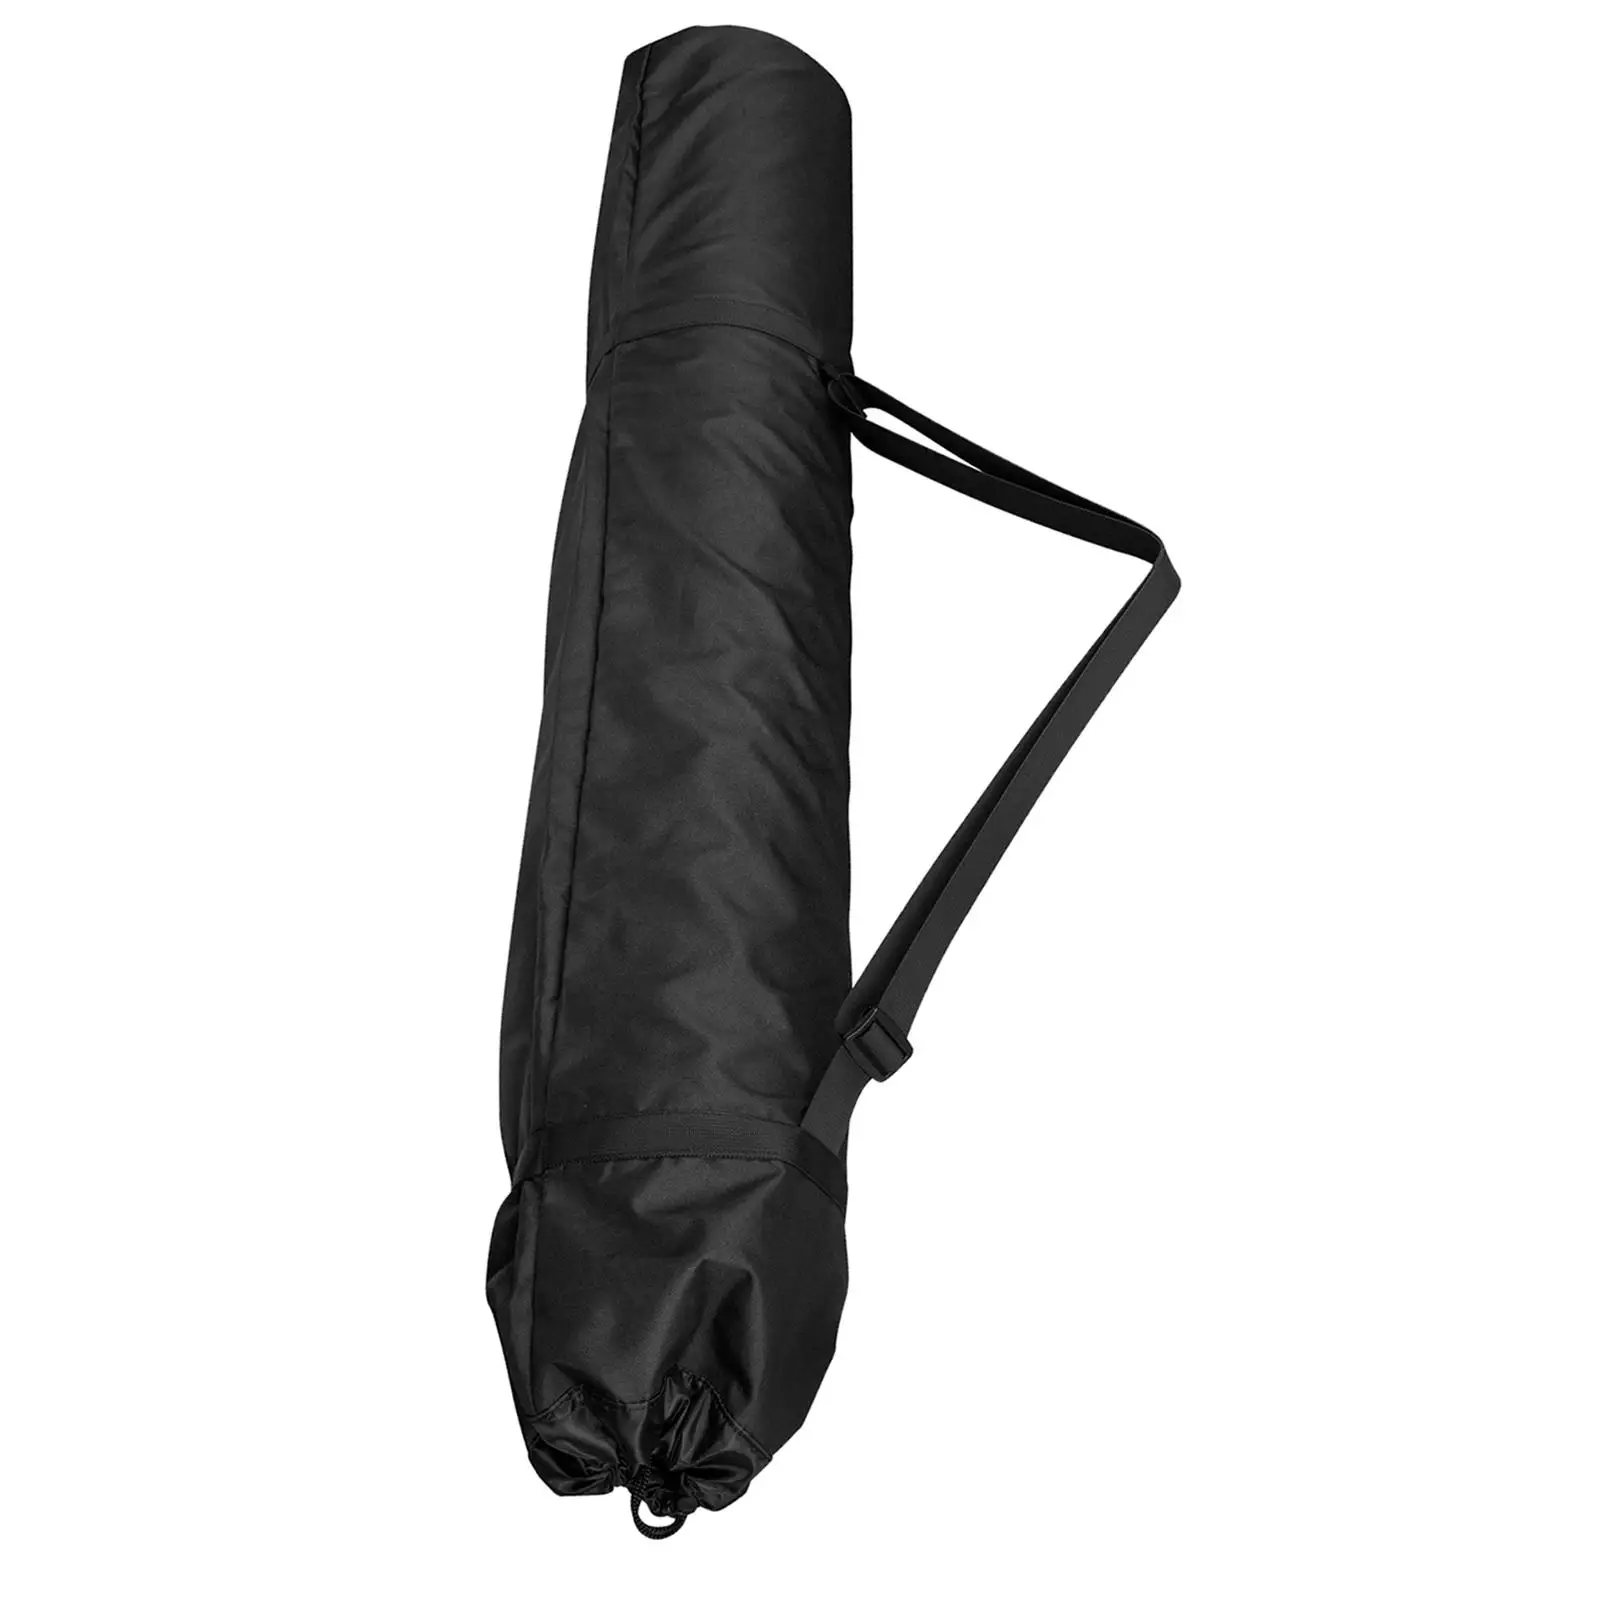 Portable Replacement Bag Folding Chair with Shoulder Straps Carry Bag for Travel